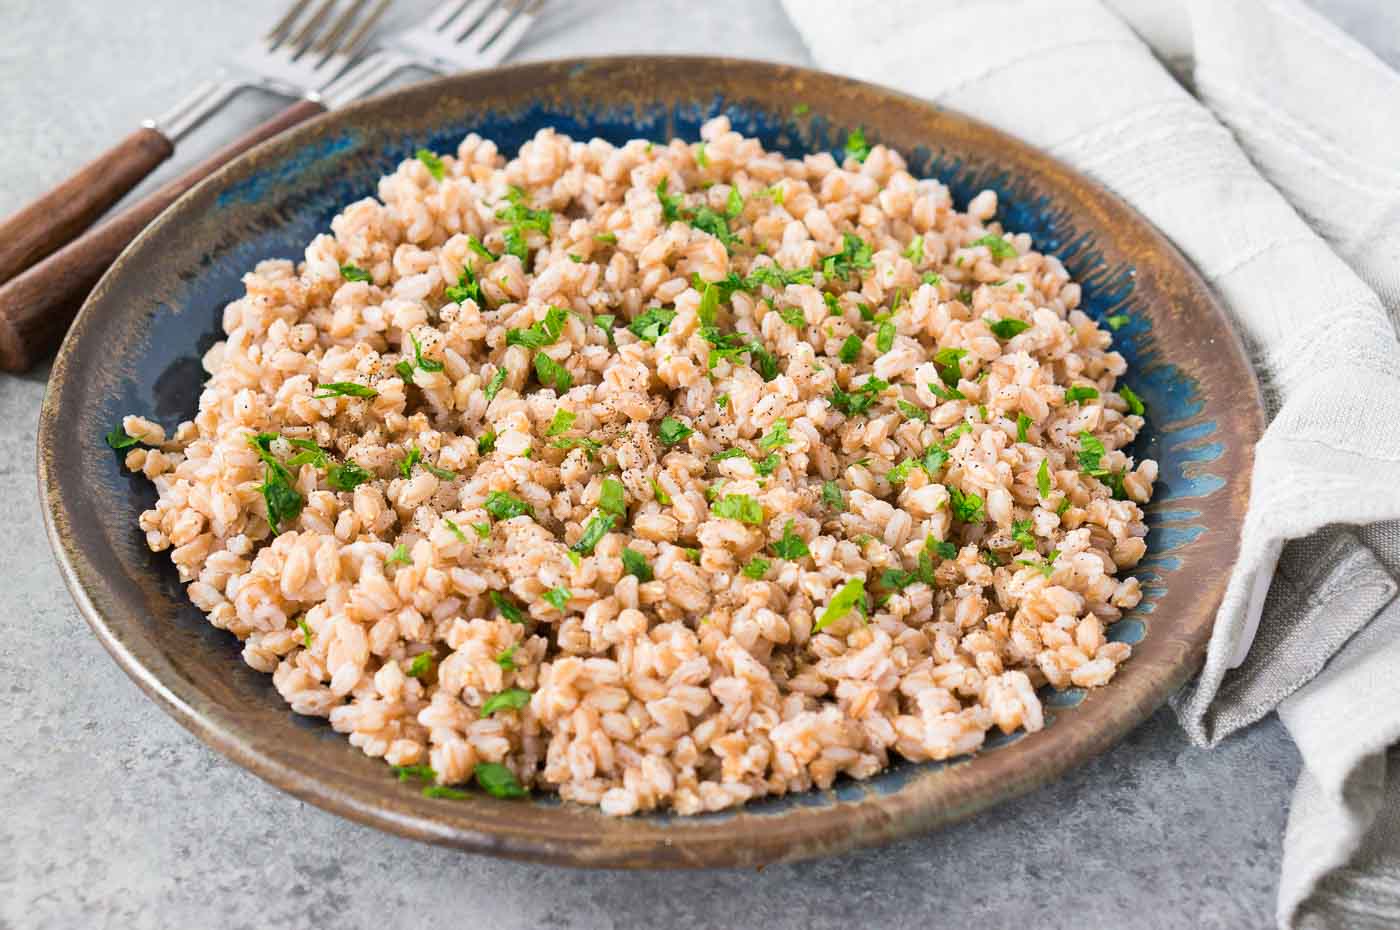 cooked farro on a plate